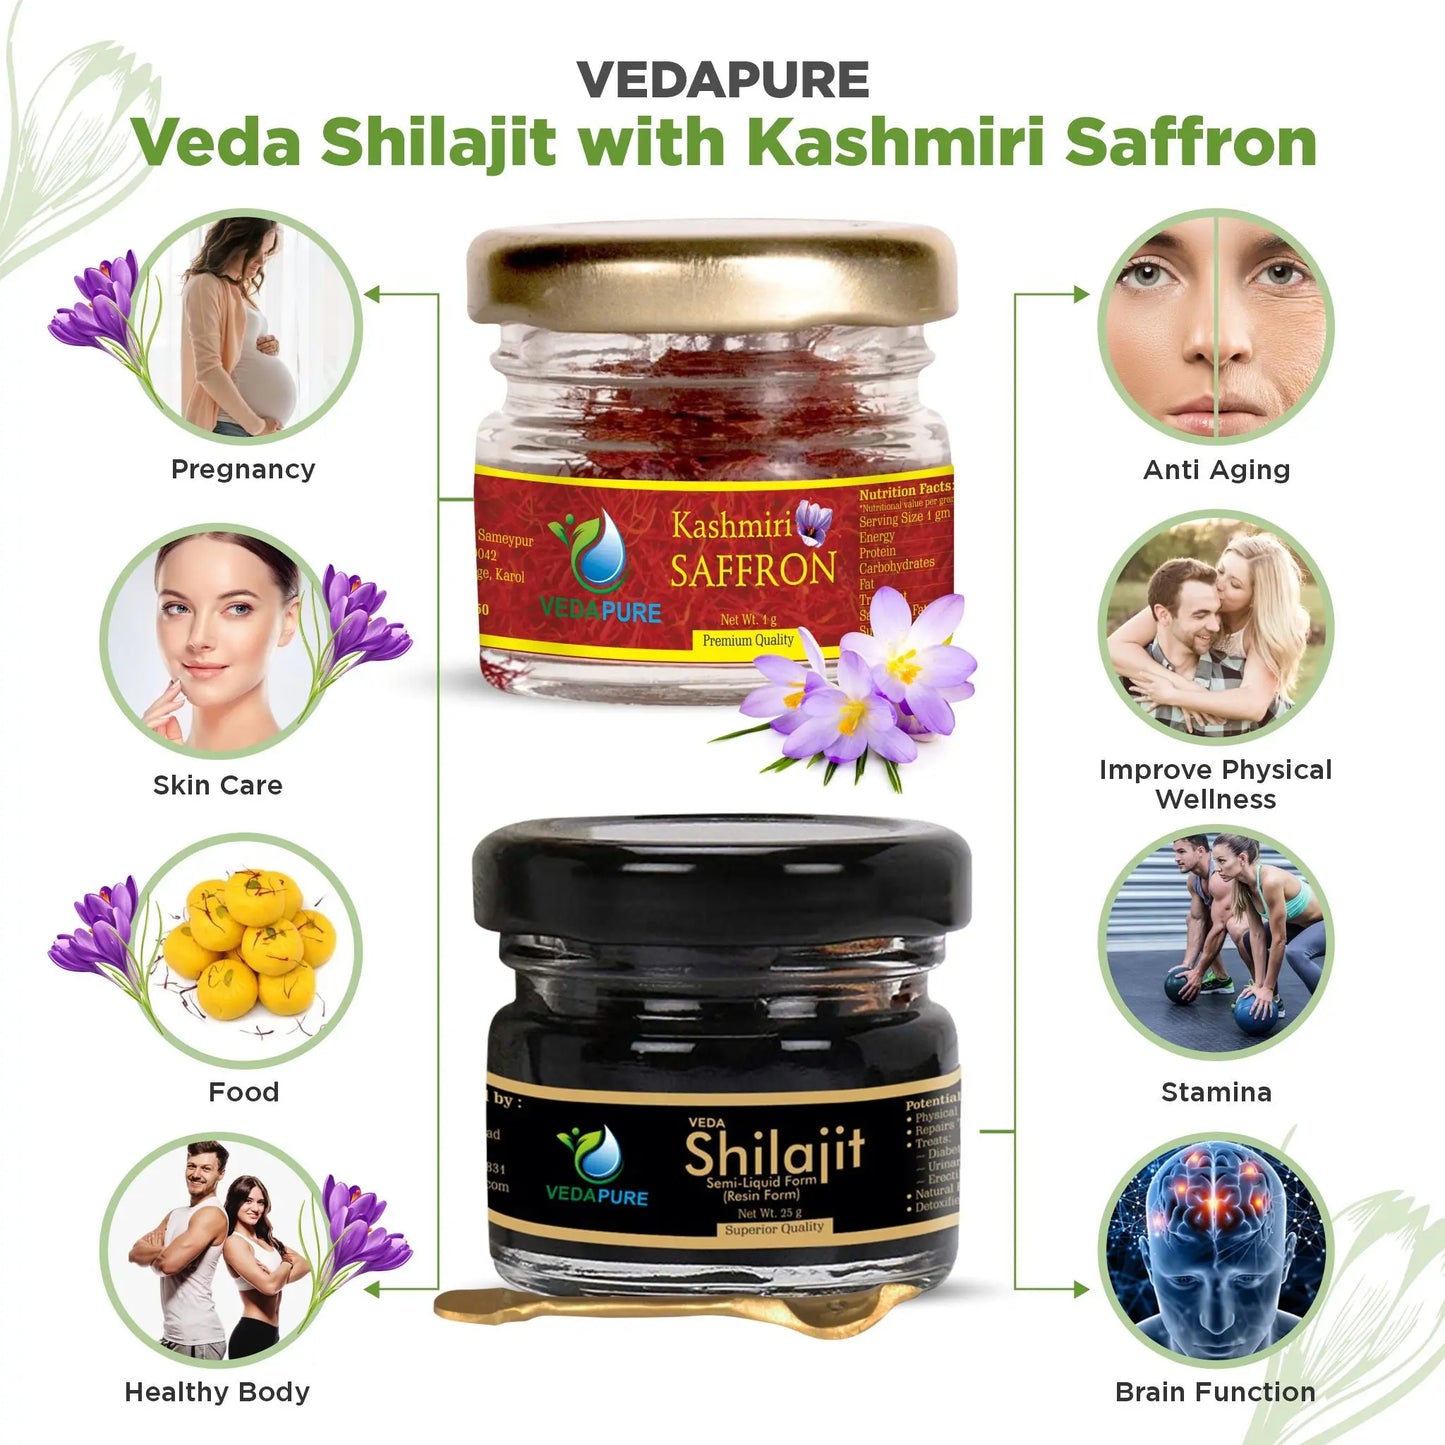 Vedapure Ayurvedic Natural and Pure Raw 25g Shilajit Resin with 1g Kashmir Kesar Saffron Combo Pack Vedapure Naturals